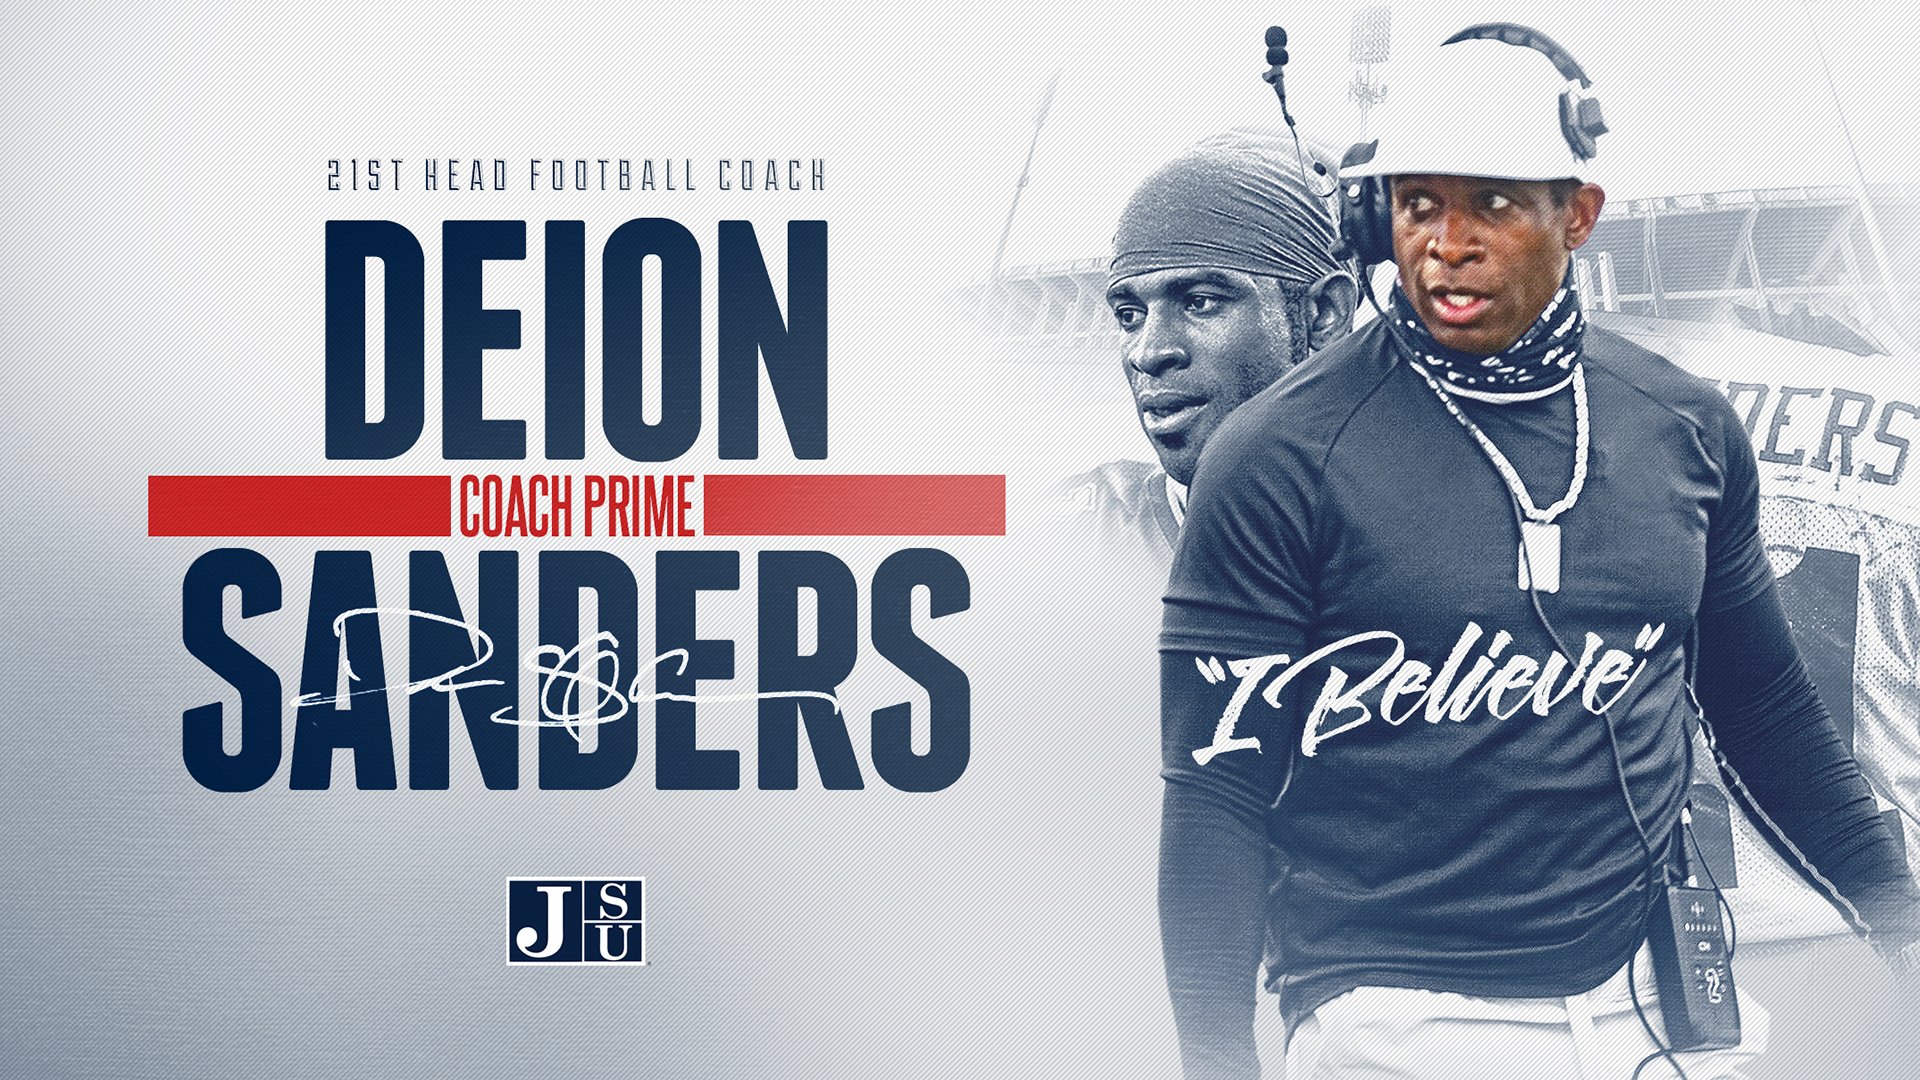 Jackson State Athletics Sanders officially named the 21st head football coach at Jackson State University #CoachPrime Read more ➡️ #IBelieve x #BleedTheeBlue x #ProtectTheeBlock